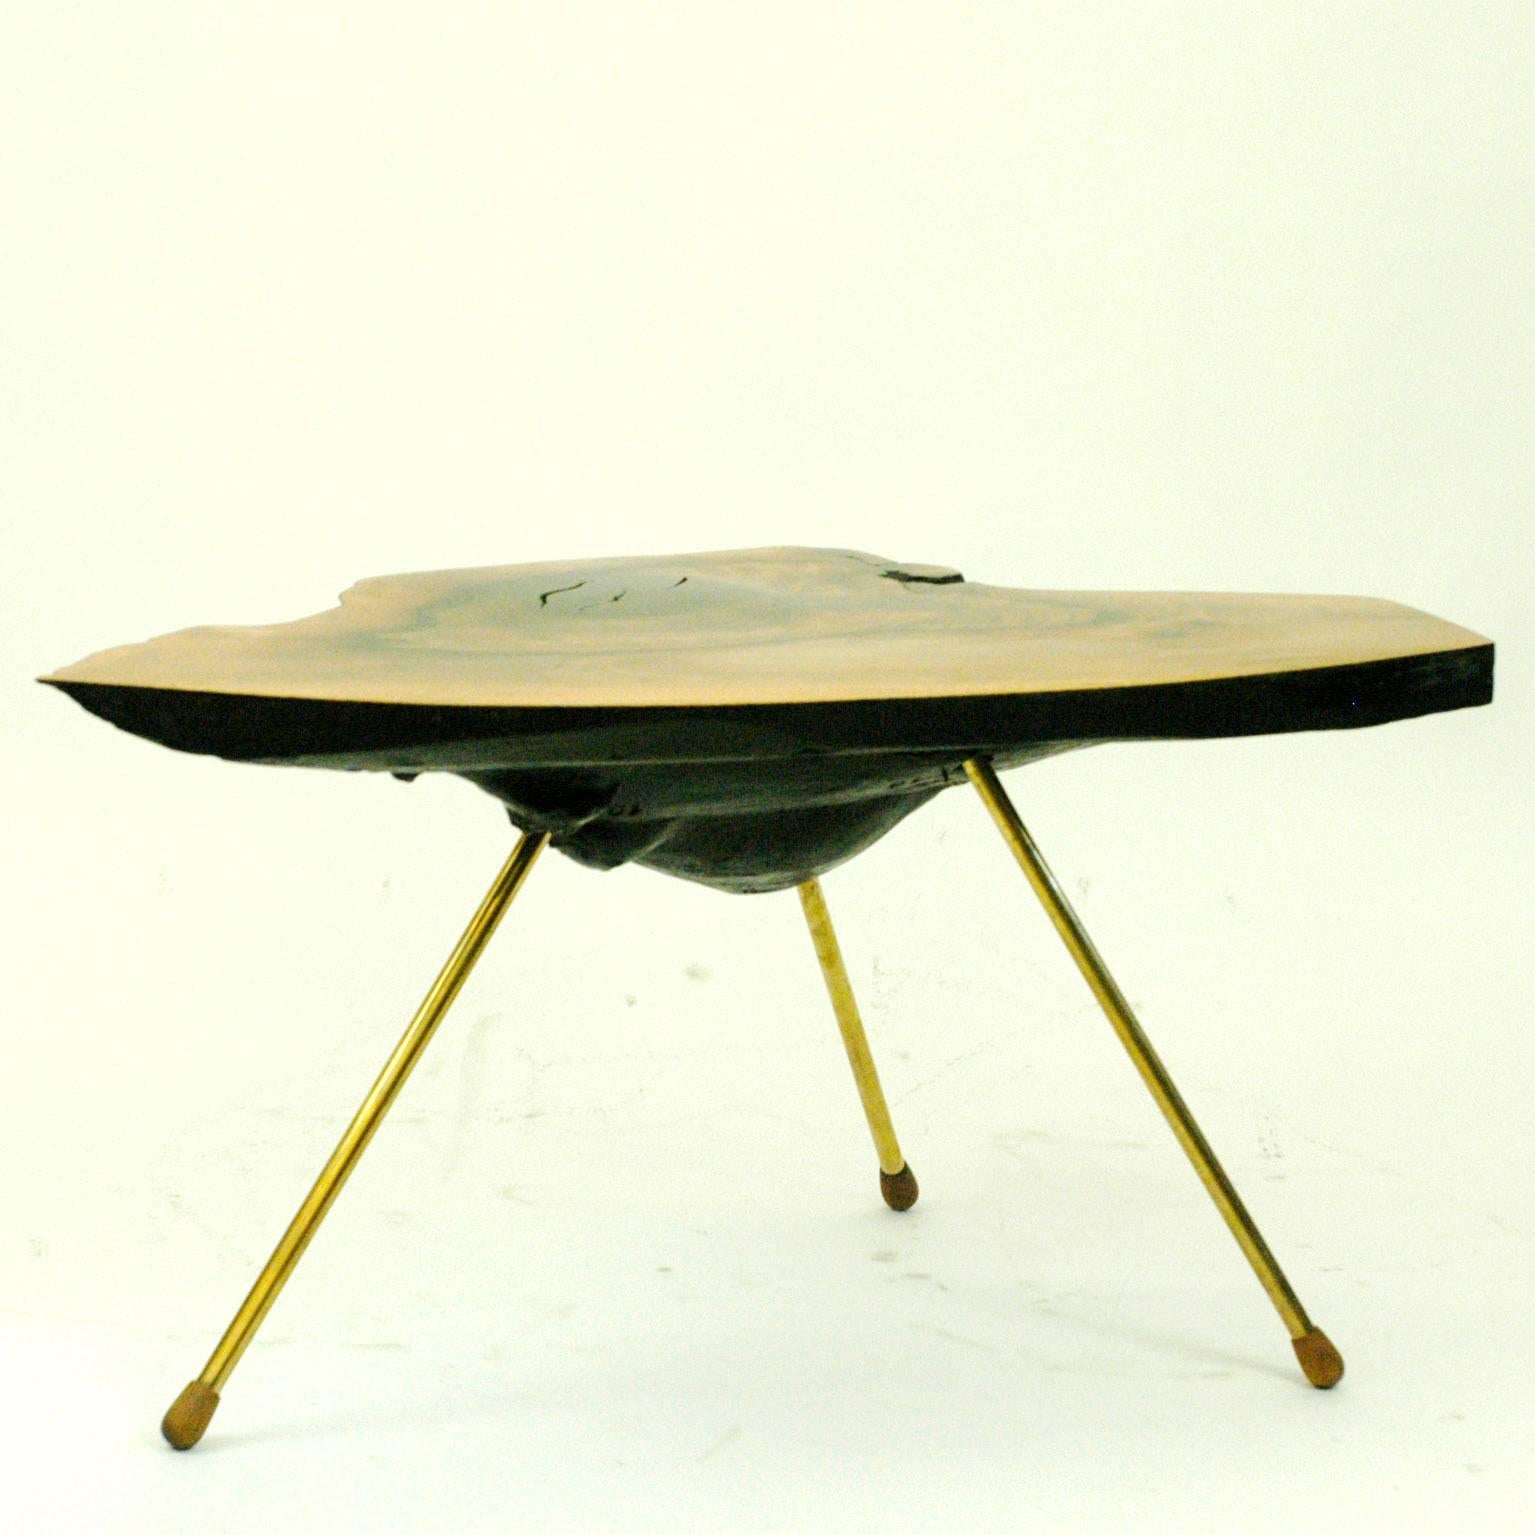 Excellent Austrian, 1950s tree trunk table made from walnut with brass legs and rare wooden shoes, marked "Made in Austria" and numbered with "10".